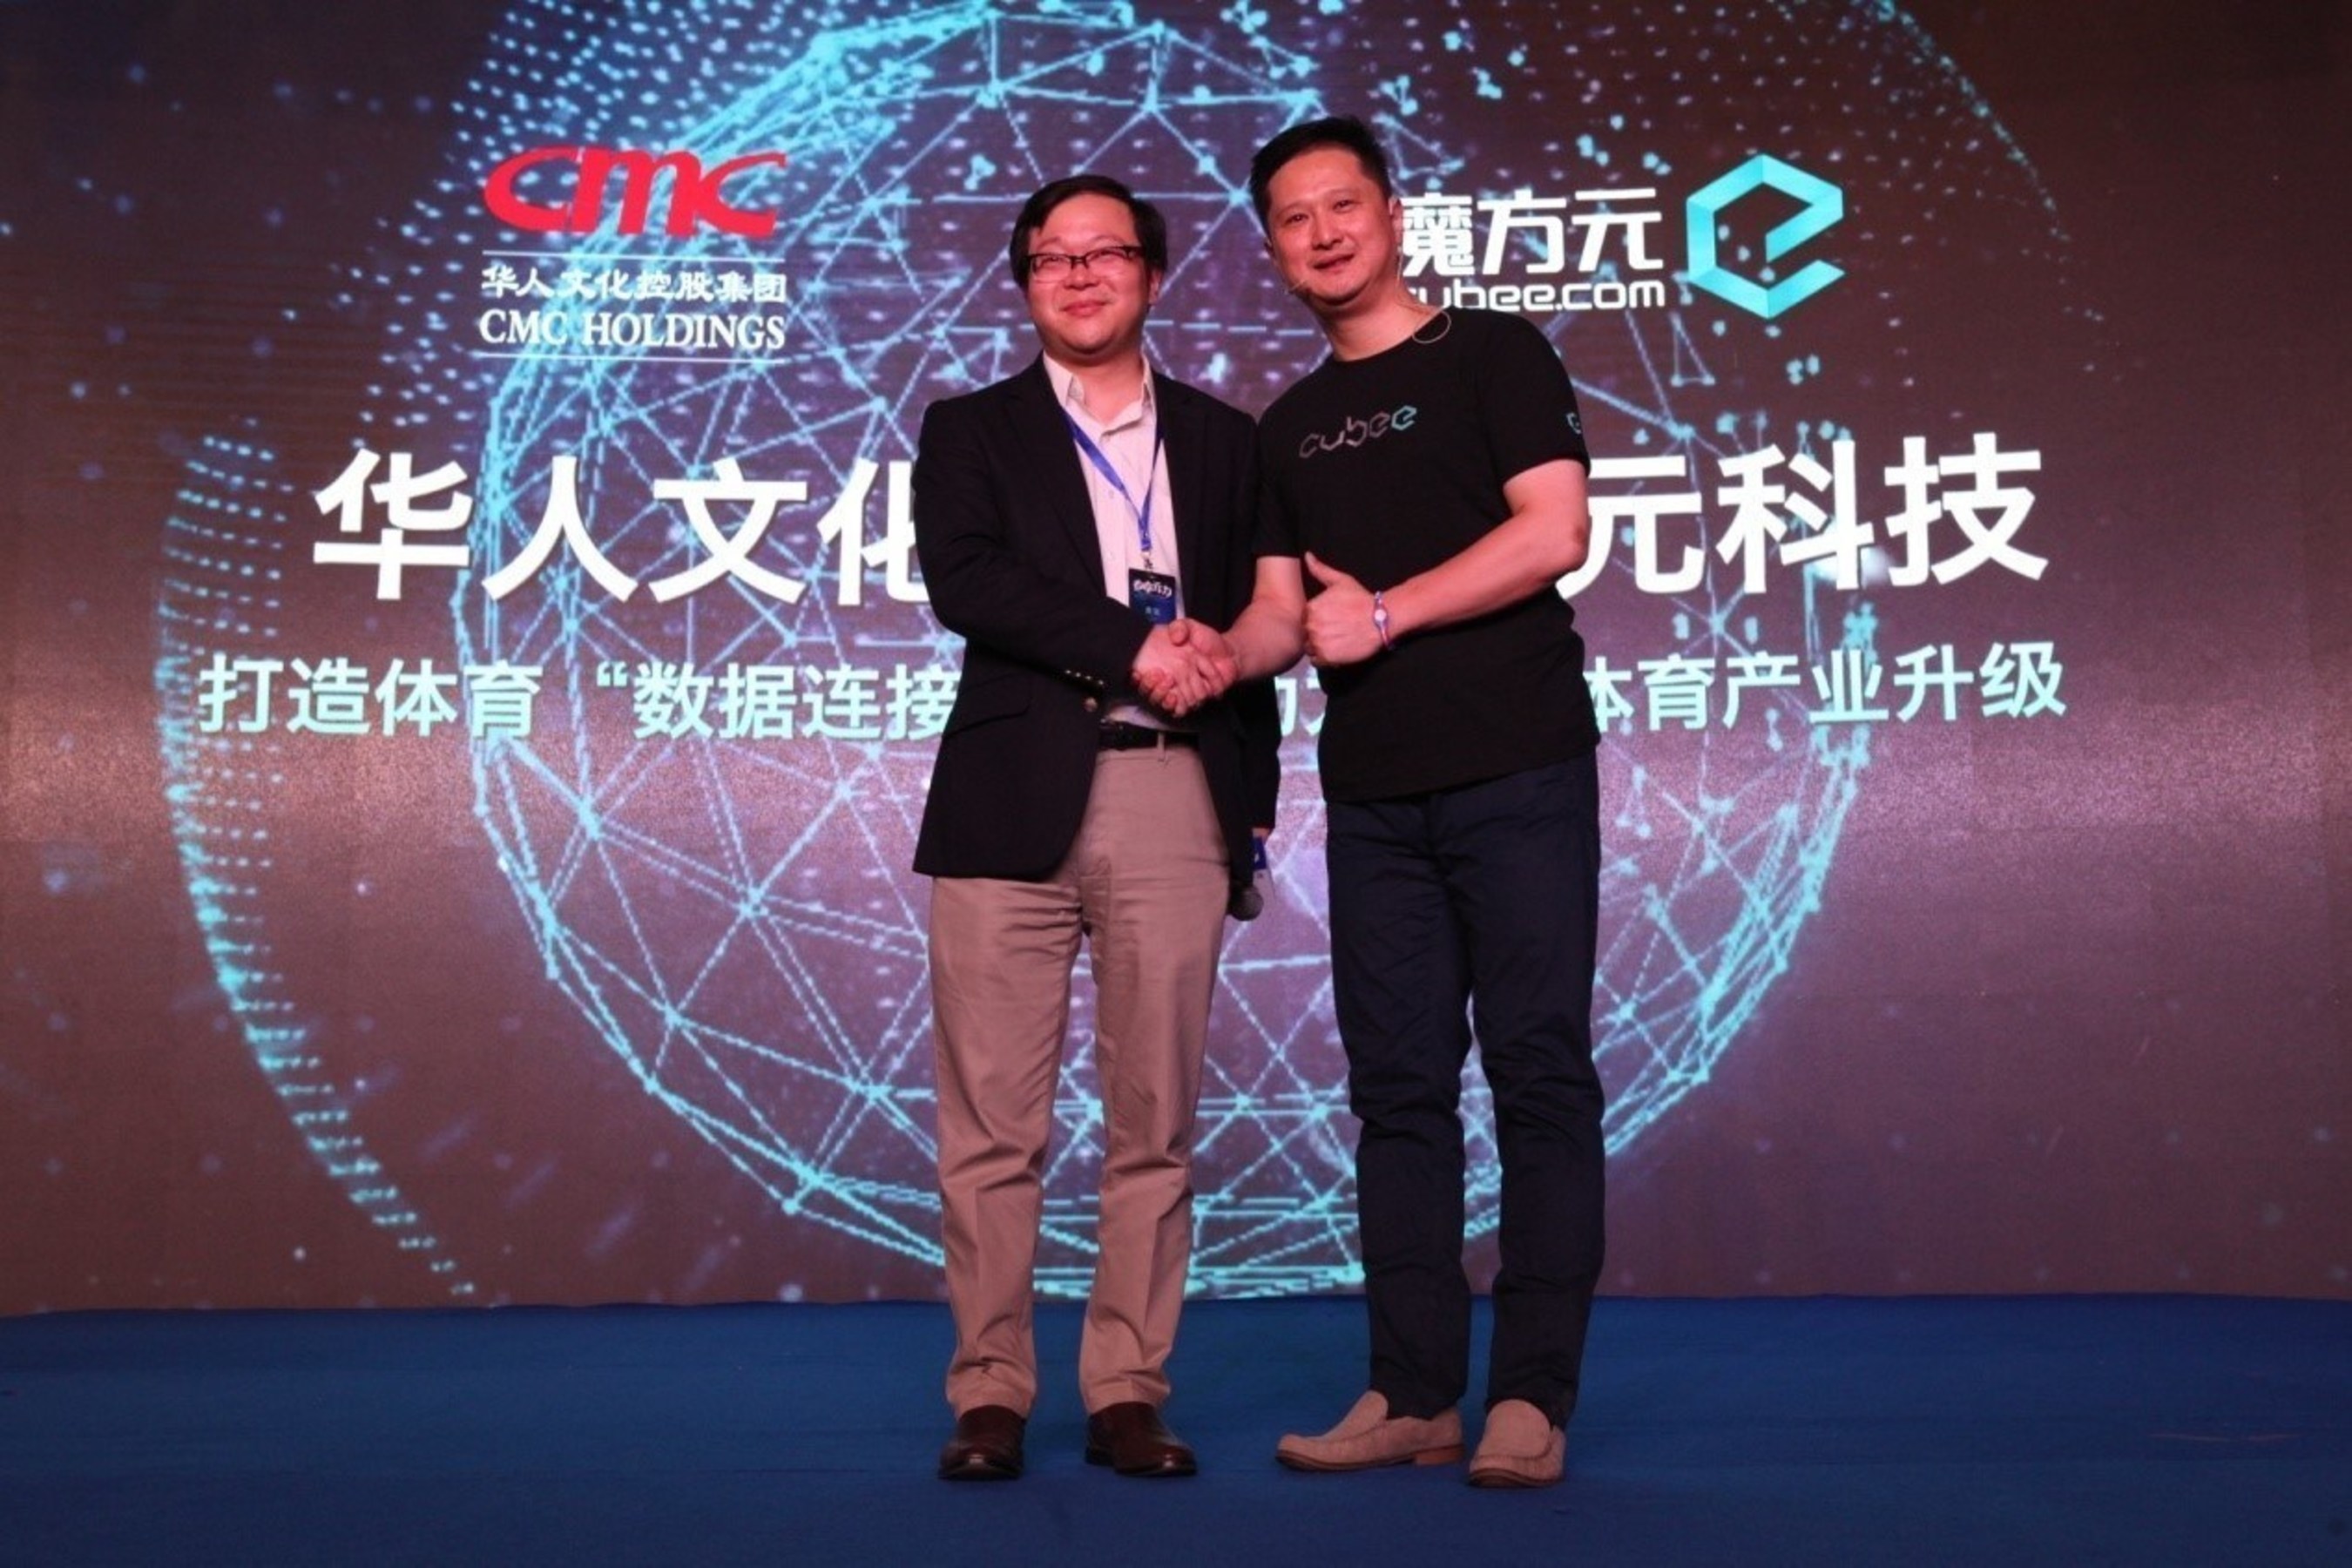 President of CMC Xu Zhihao (left), Cubee Technology founder & CEO Chen Hao (right)